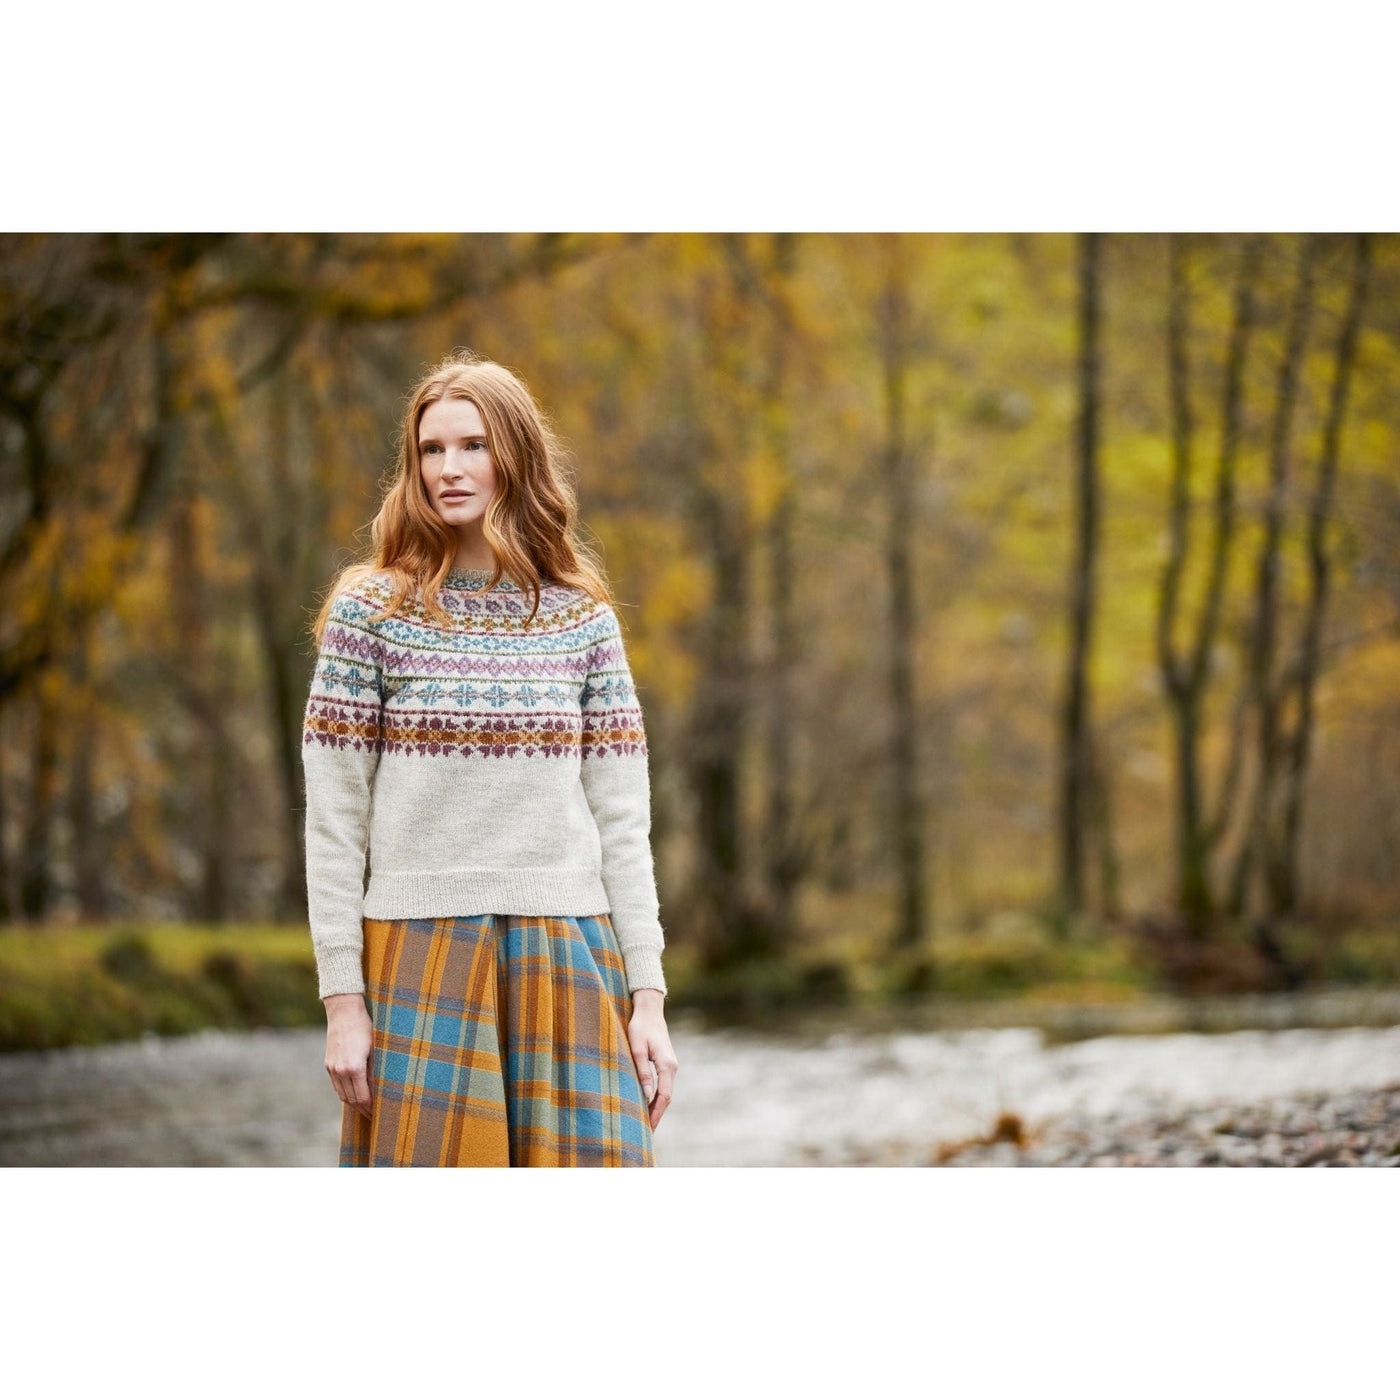 model standing outside wearing Catbells Sweater by Marie Wallin and a plaid skirt; main color of sweater is raw with multicolor design on top